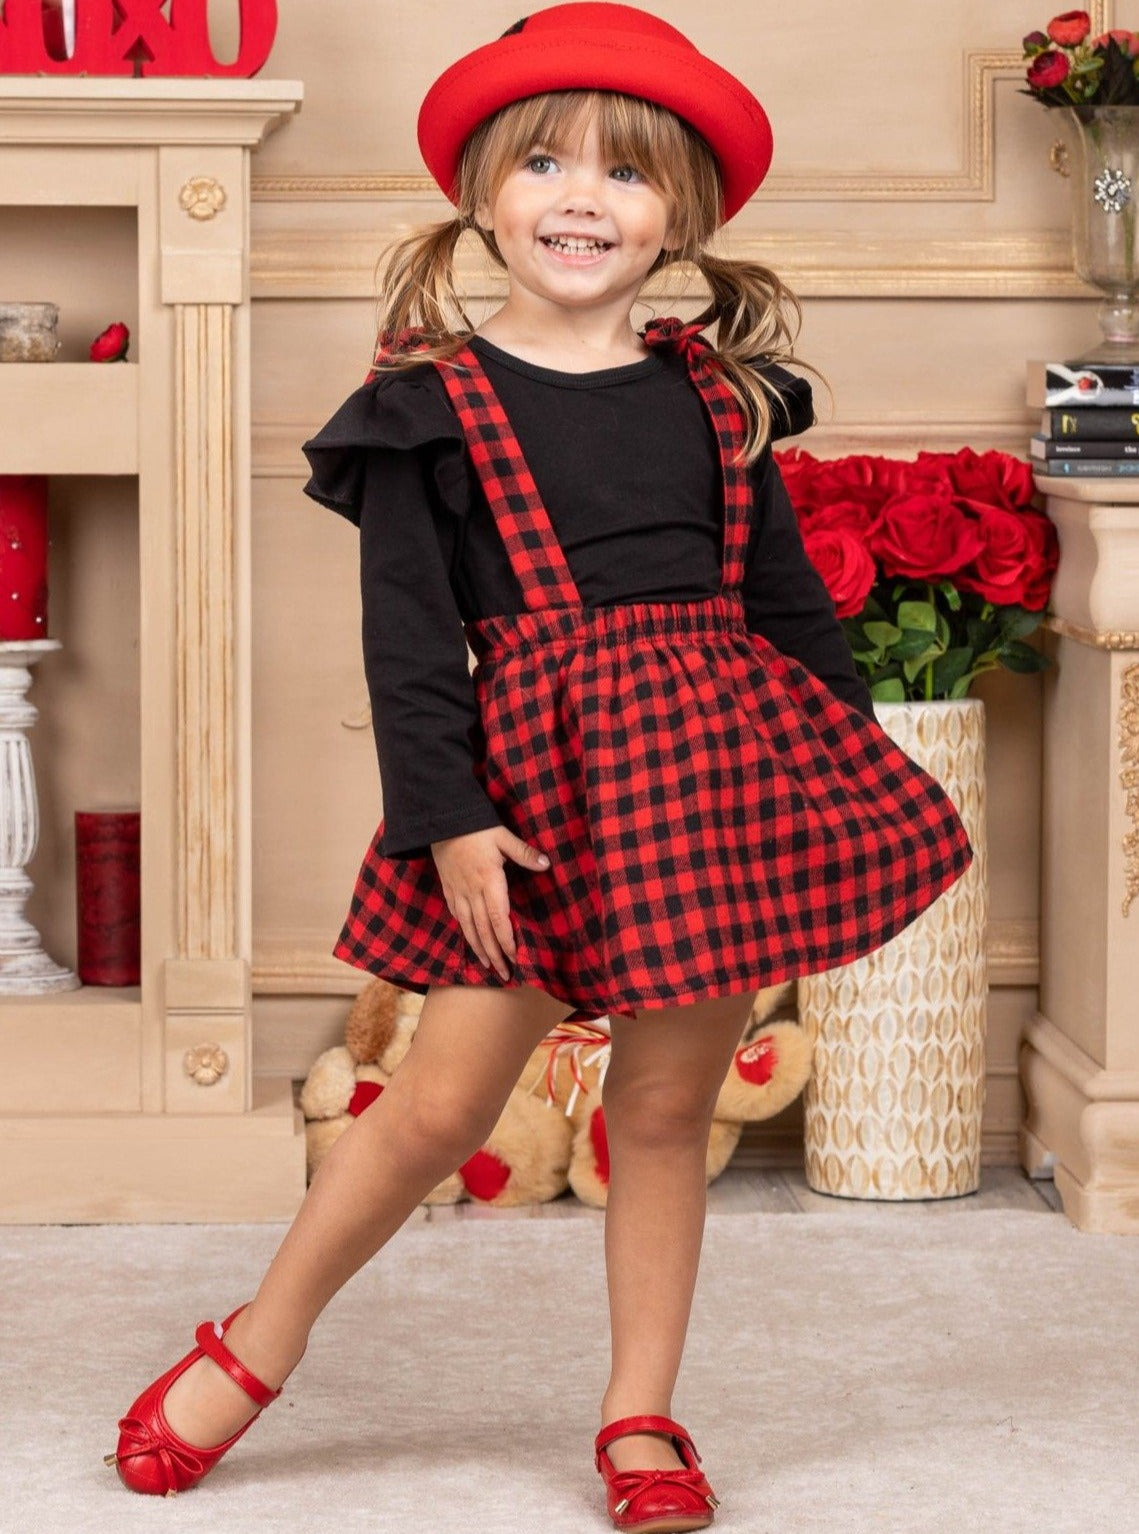 Girls Long Sleeved black Top and black and red Plaid Overall Dress 2T-8Y